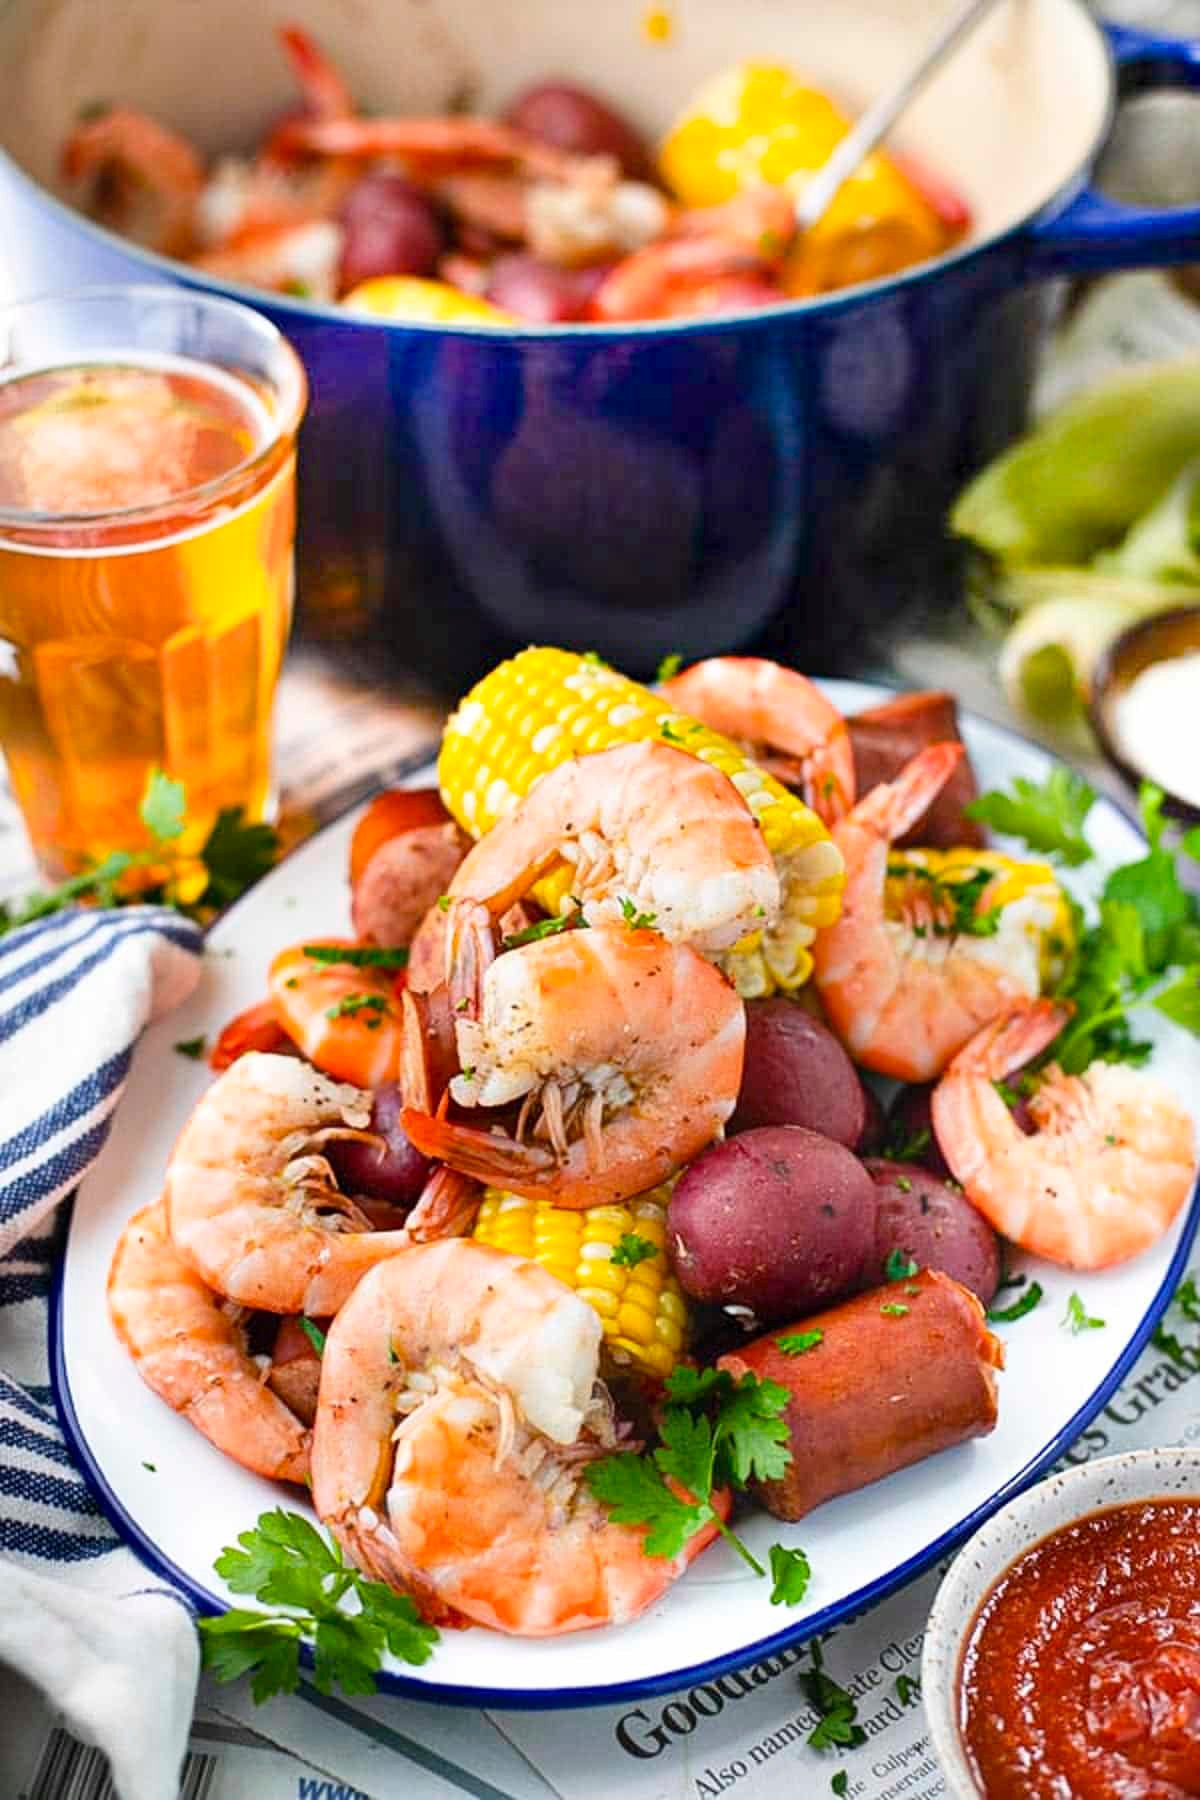 Frogmore stew served on a blue and white enamelware platter.